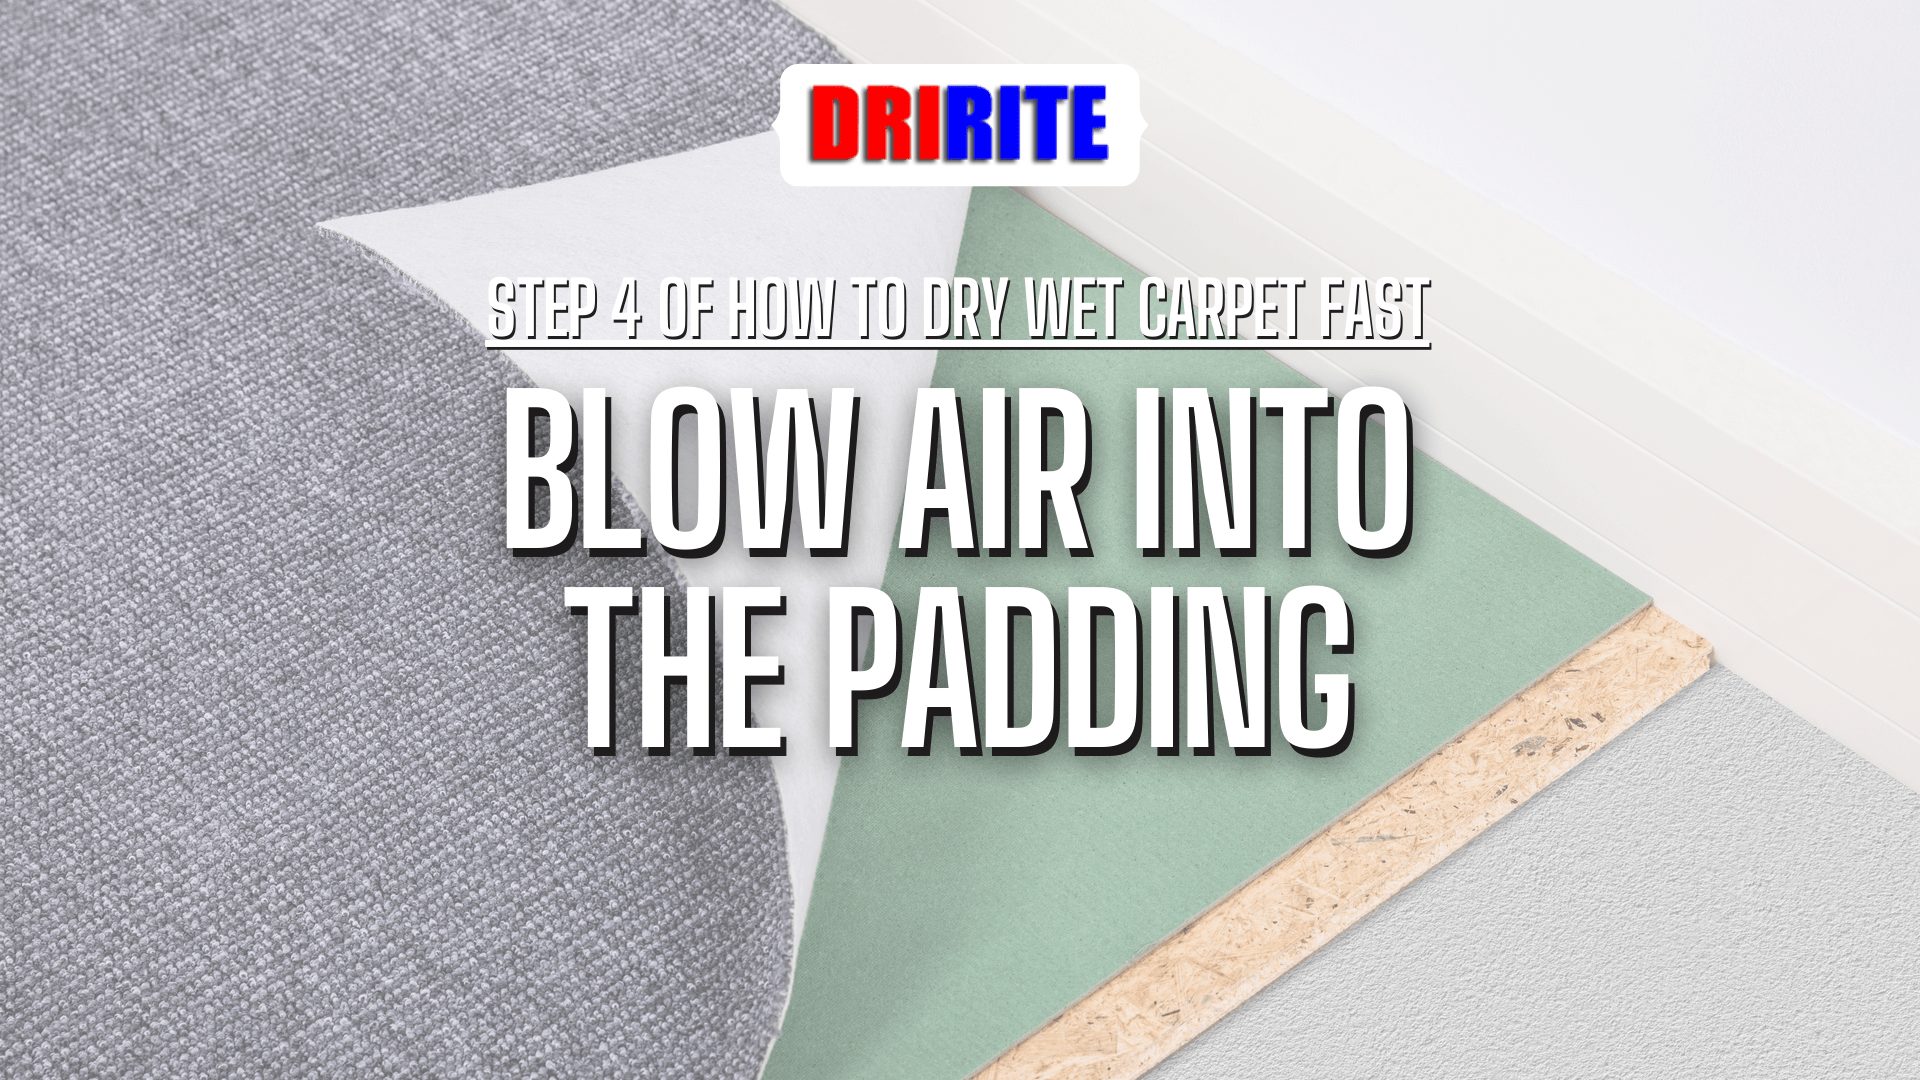 Blow Air Into The Padding - How To Dry Wet Carpet After Water Damage?